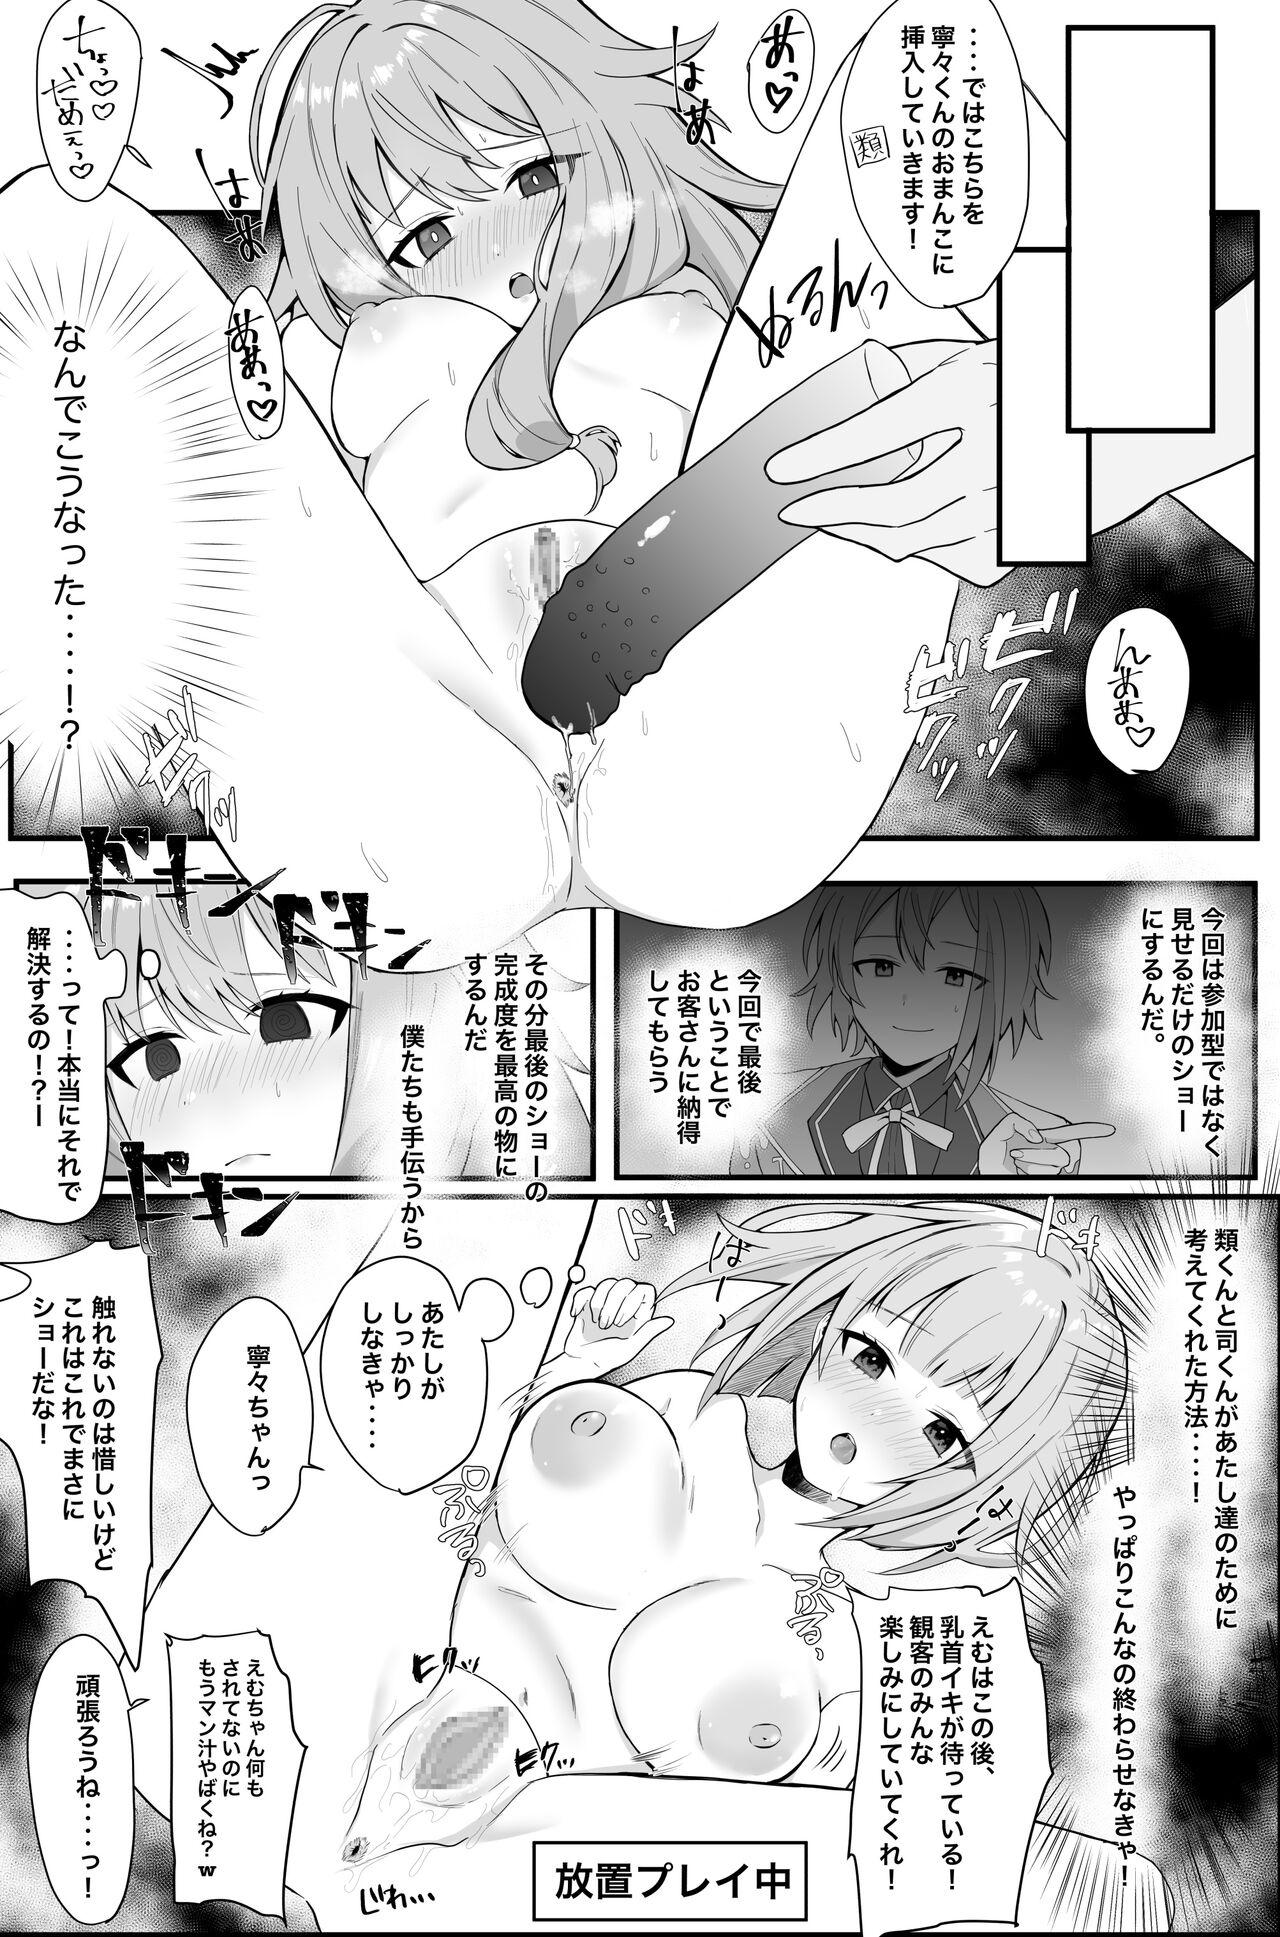 Lover えむねねちゃん決着編! - Project sekai Mofos - Page 3